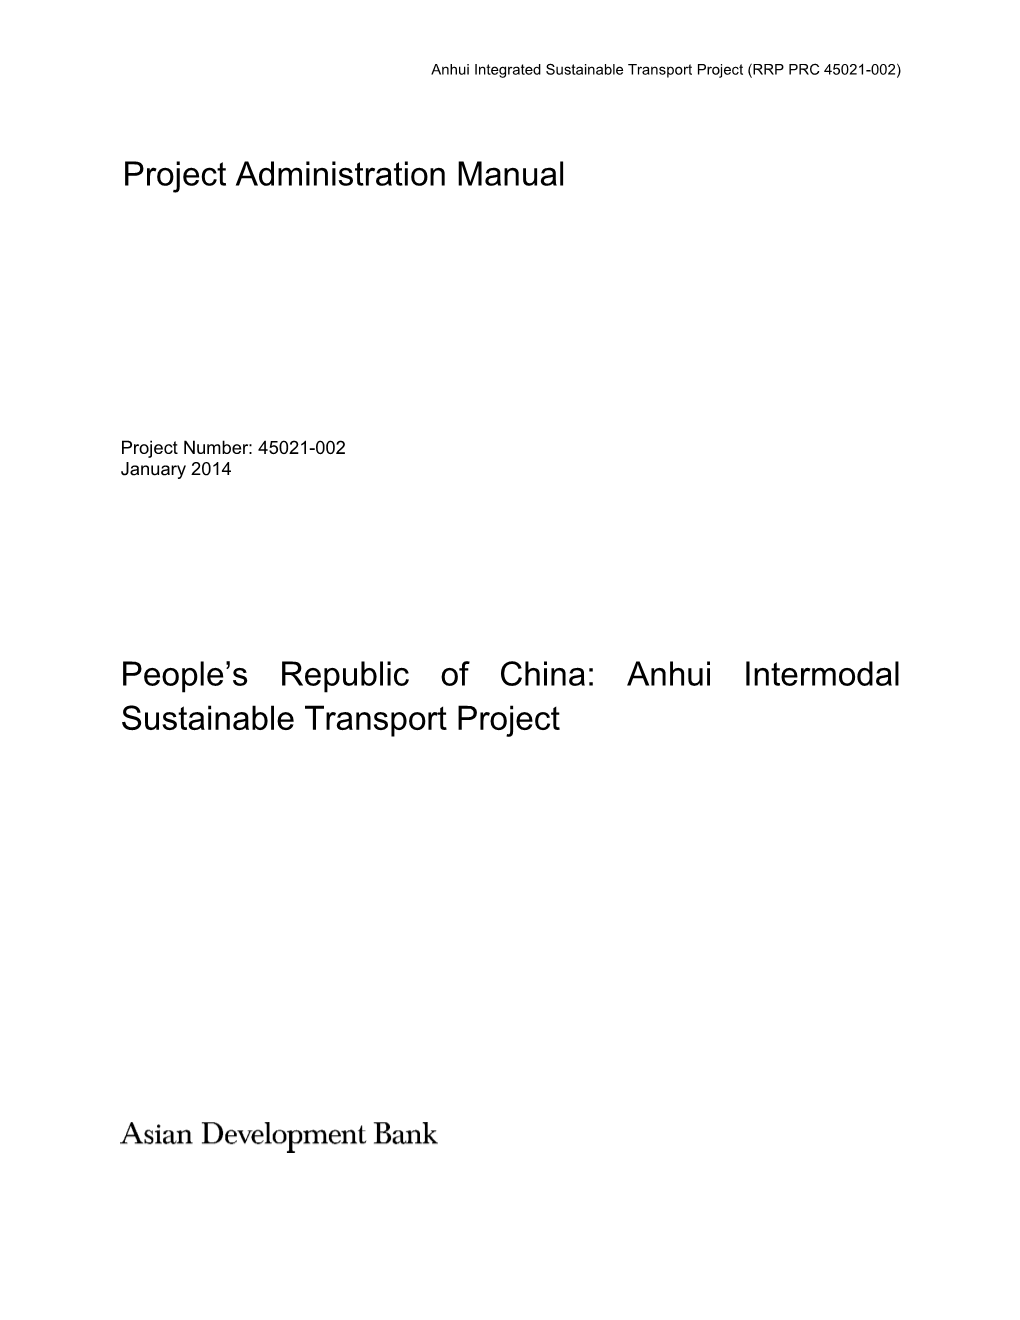 Anhui Intermodal Sustainable Transport Project: Project